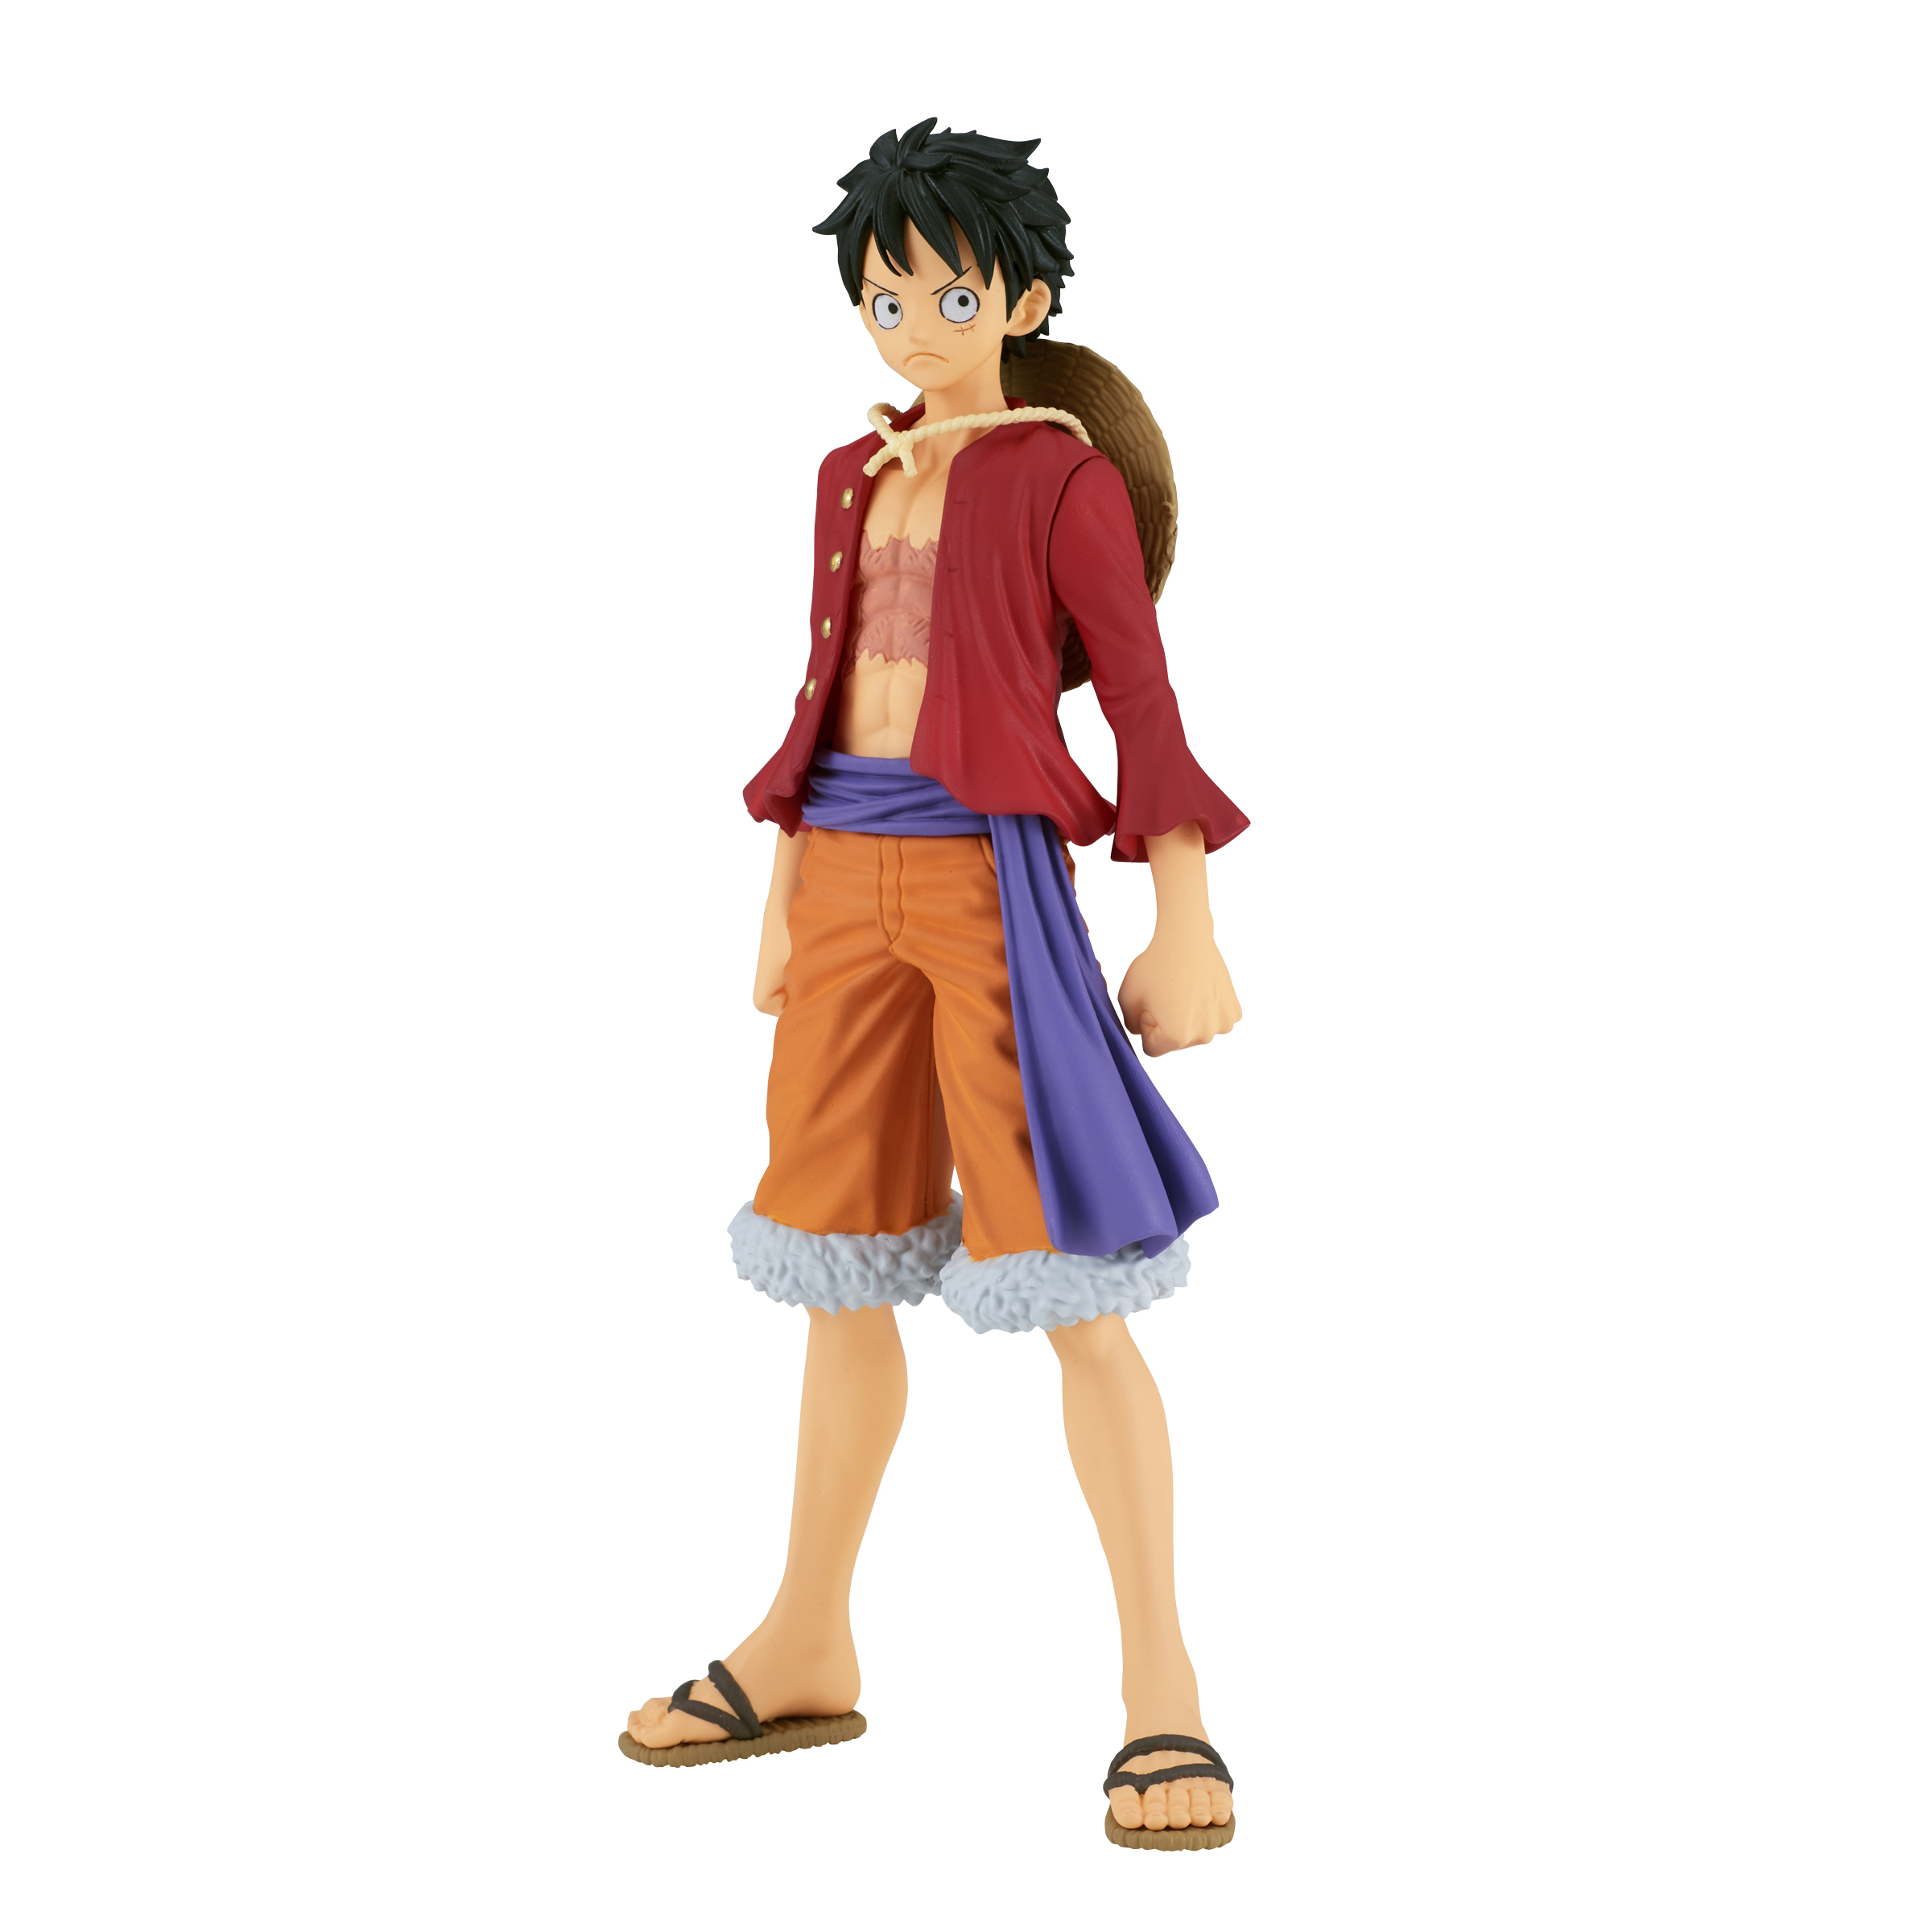 Anime Heroes: One Piece - Monkey D. Luffy Action Figure